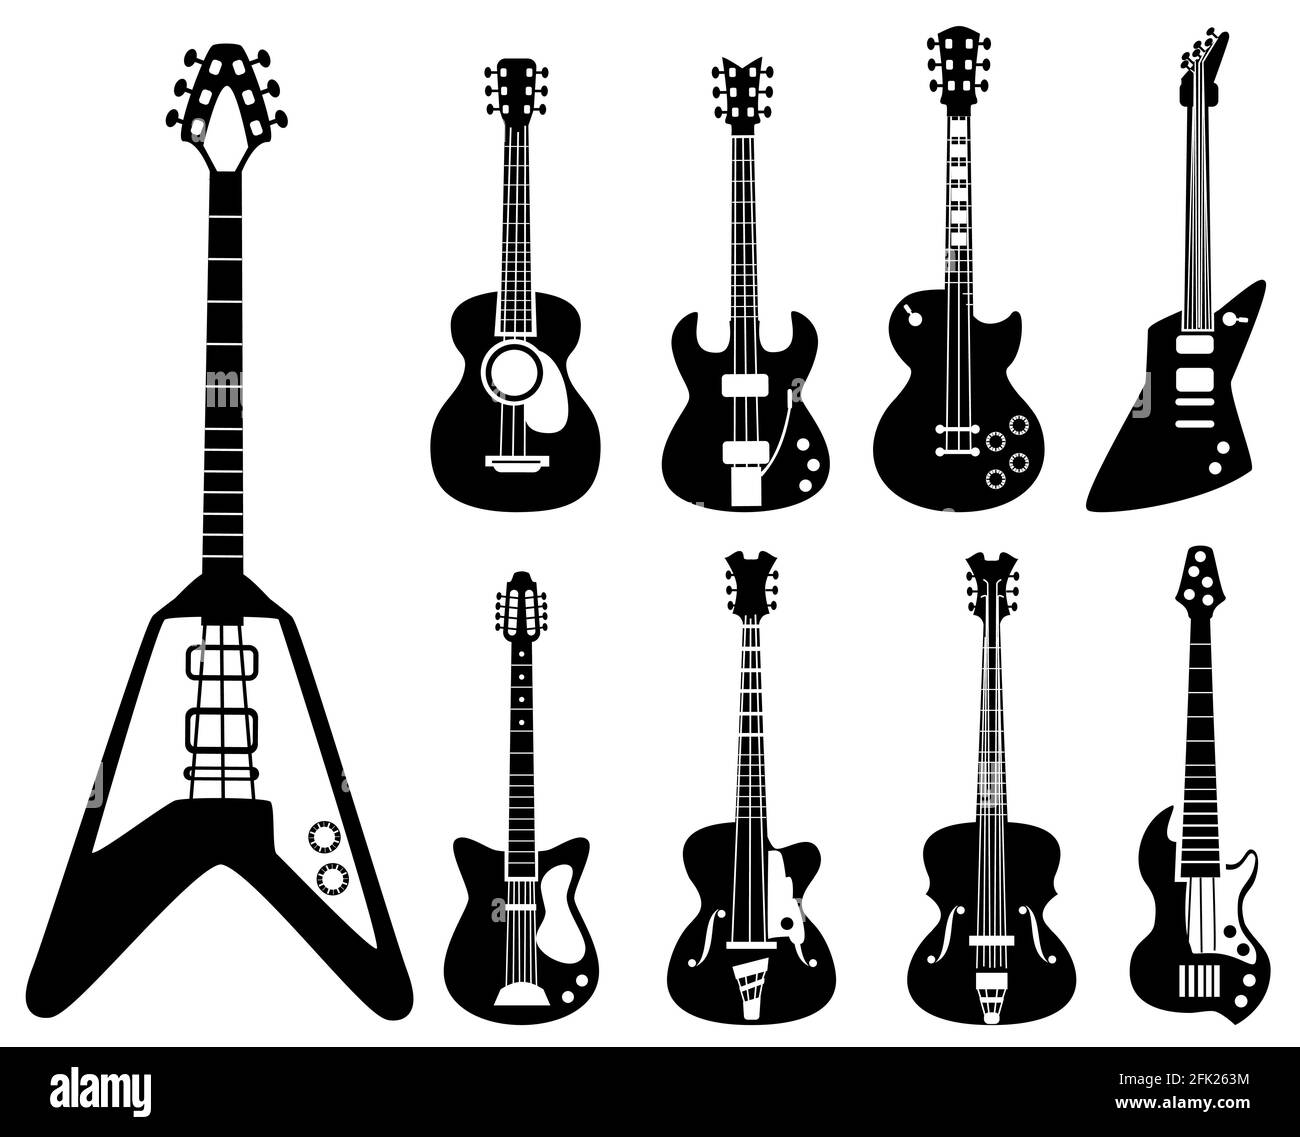 Guitar Silhouettes Musical Instruments Black Symbols Acoustic And Rock